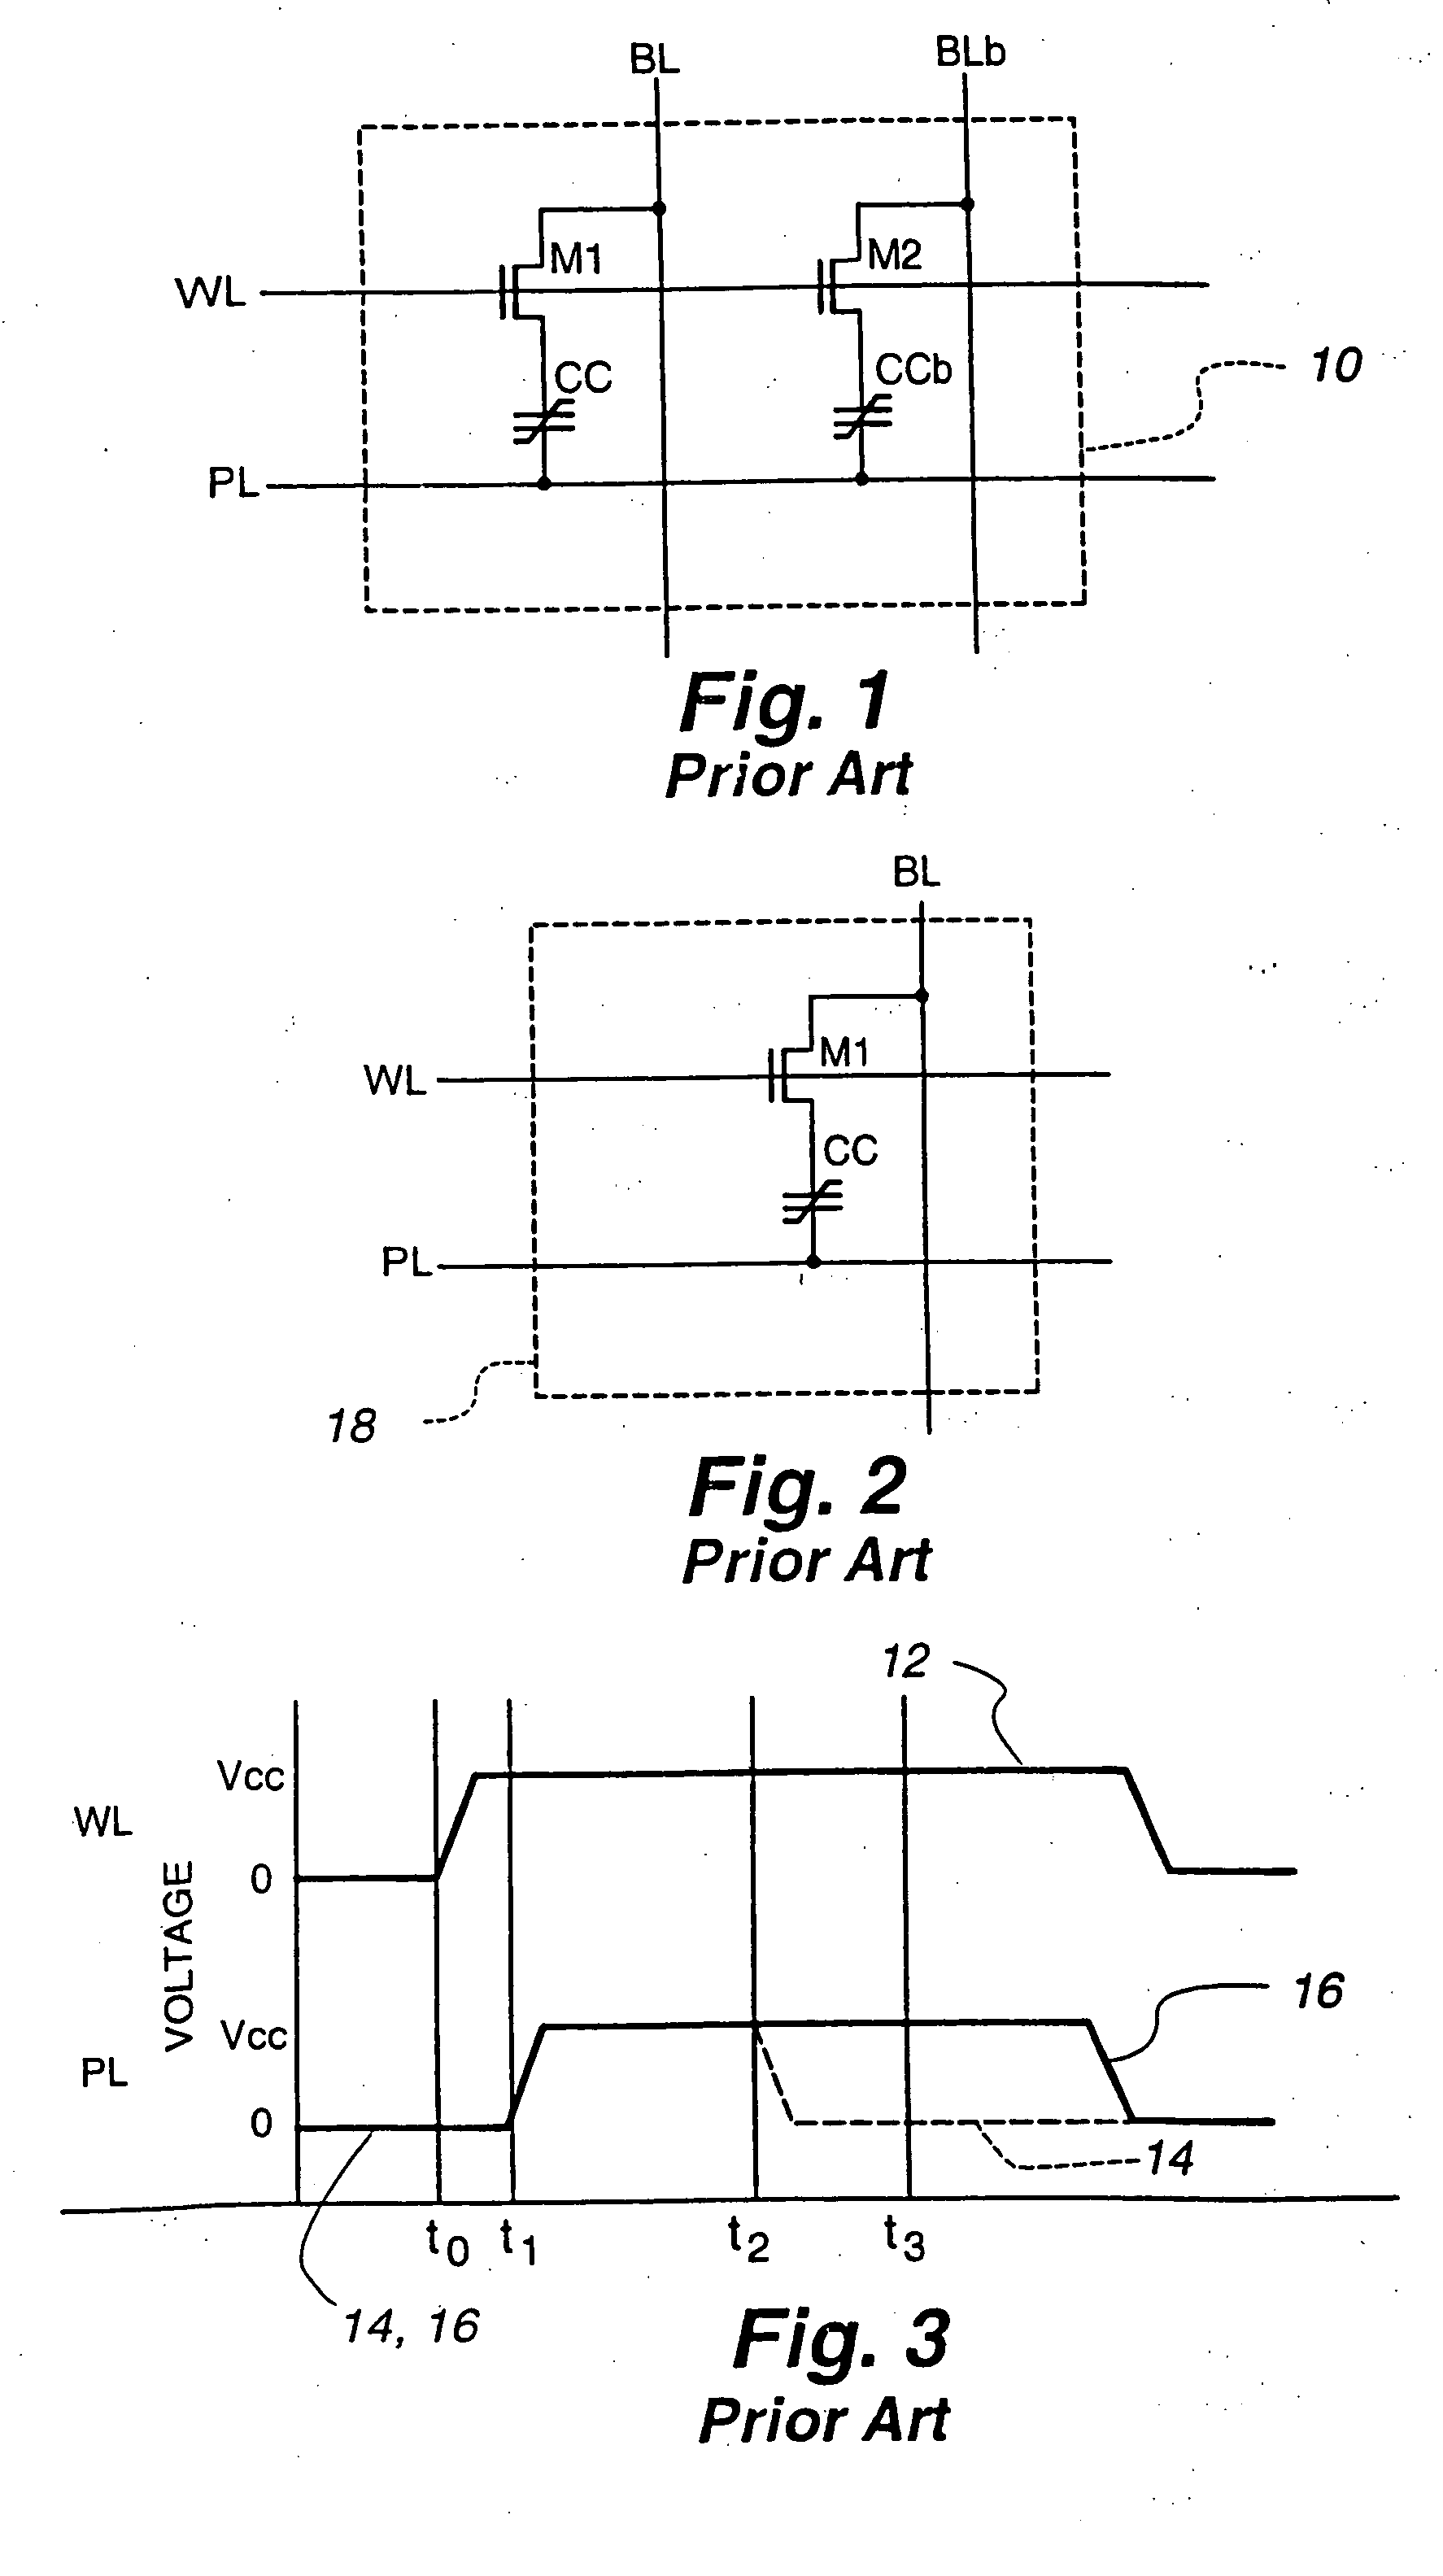 Reference cell configuration for a 1T/1C ferroelectric memory